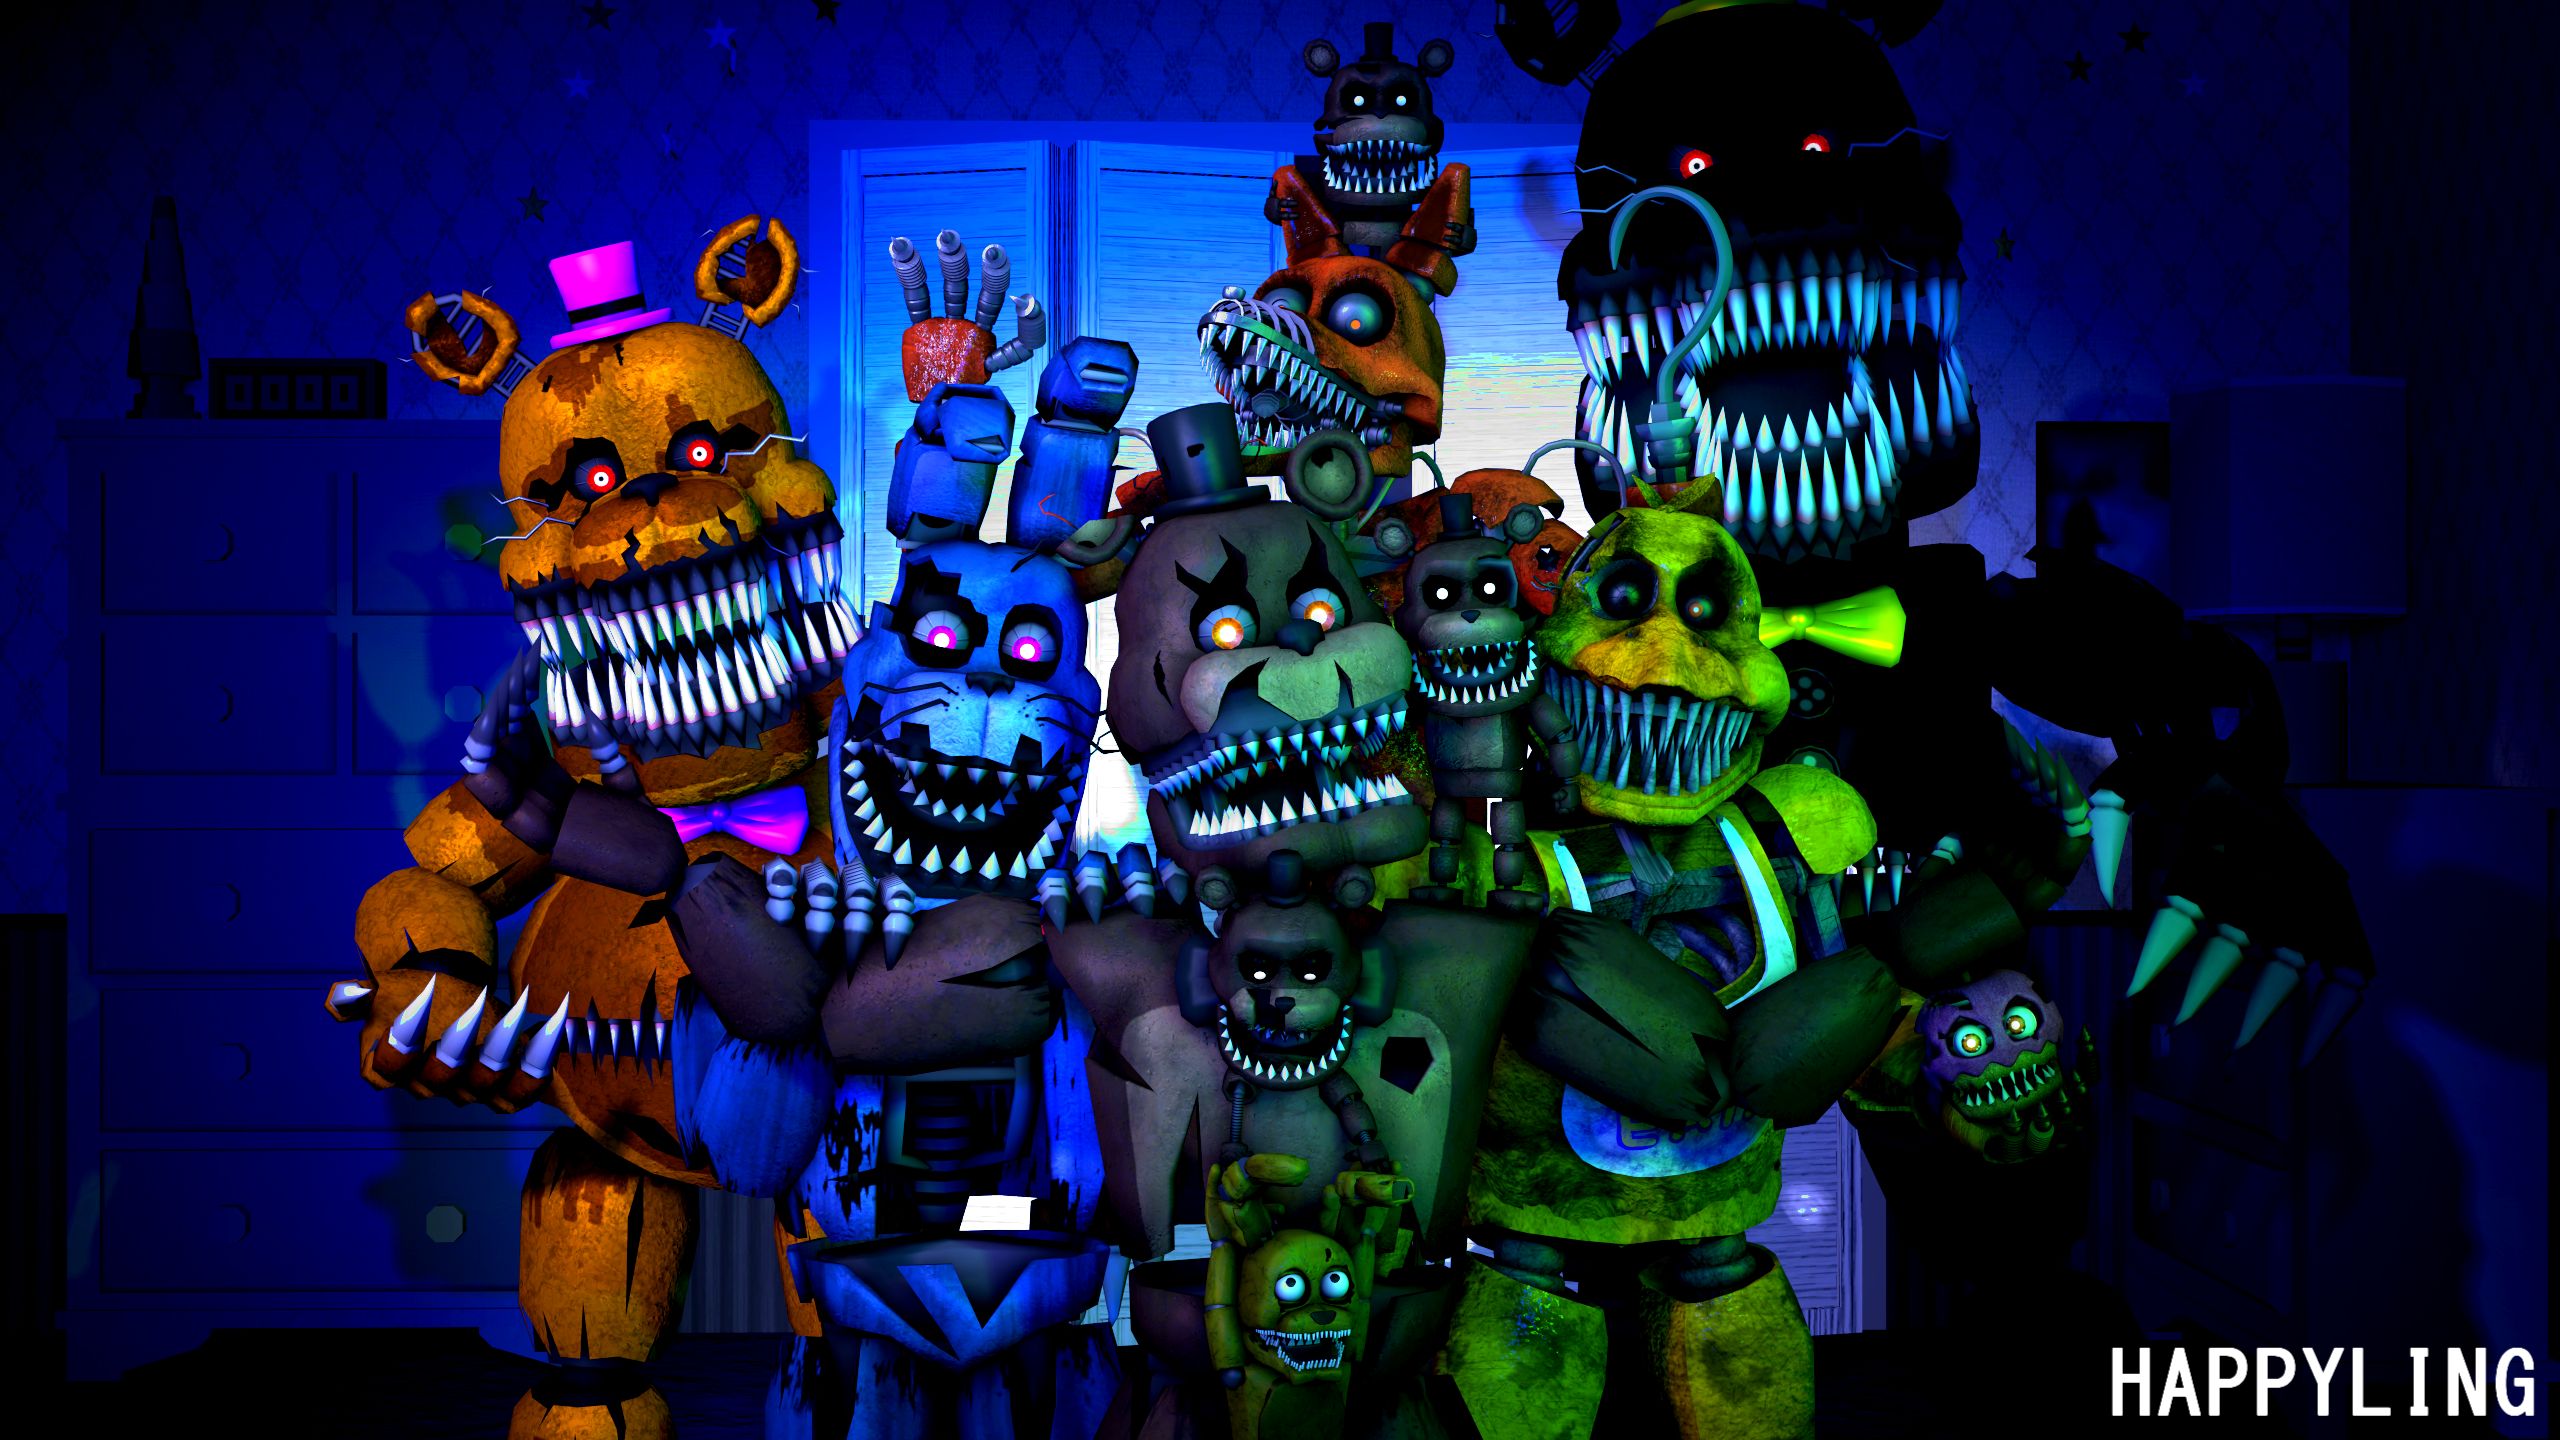 Wallpaper version | Fnaf, Tomorrow is another day, Fnaf golden freddy